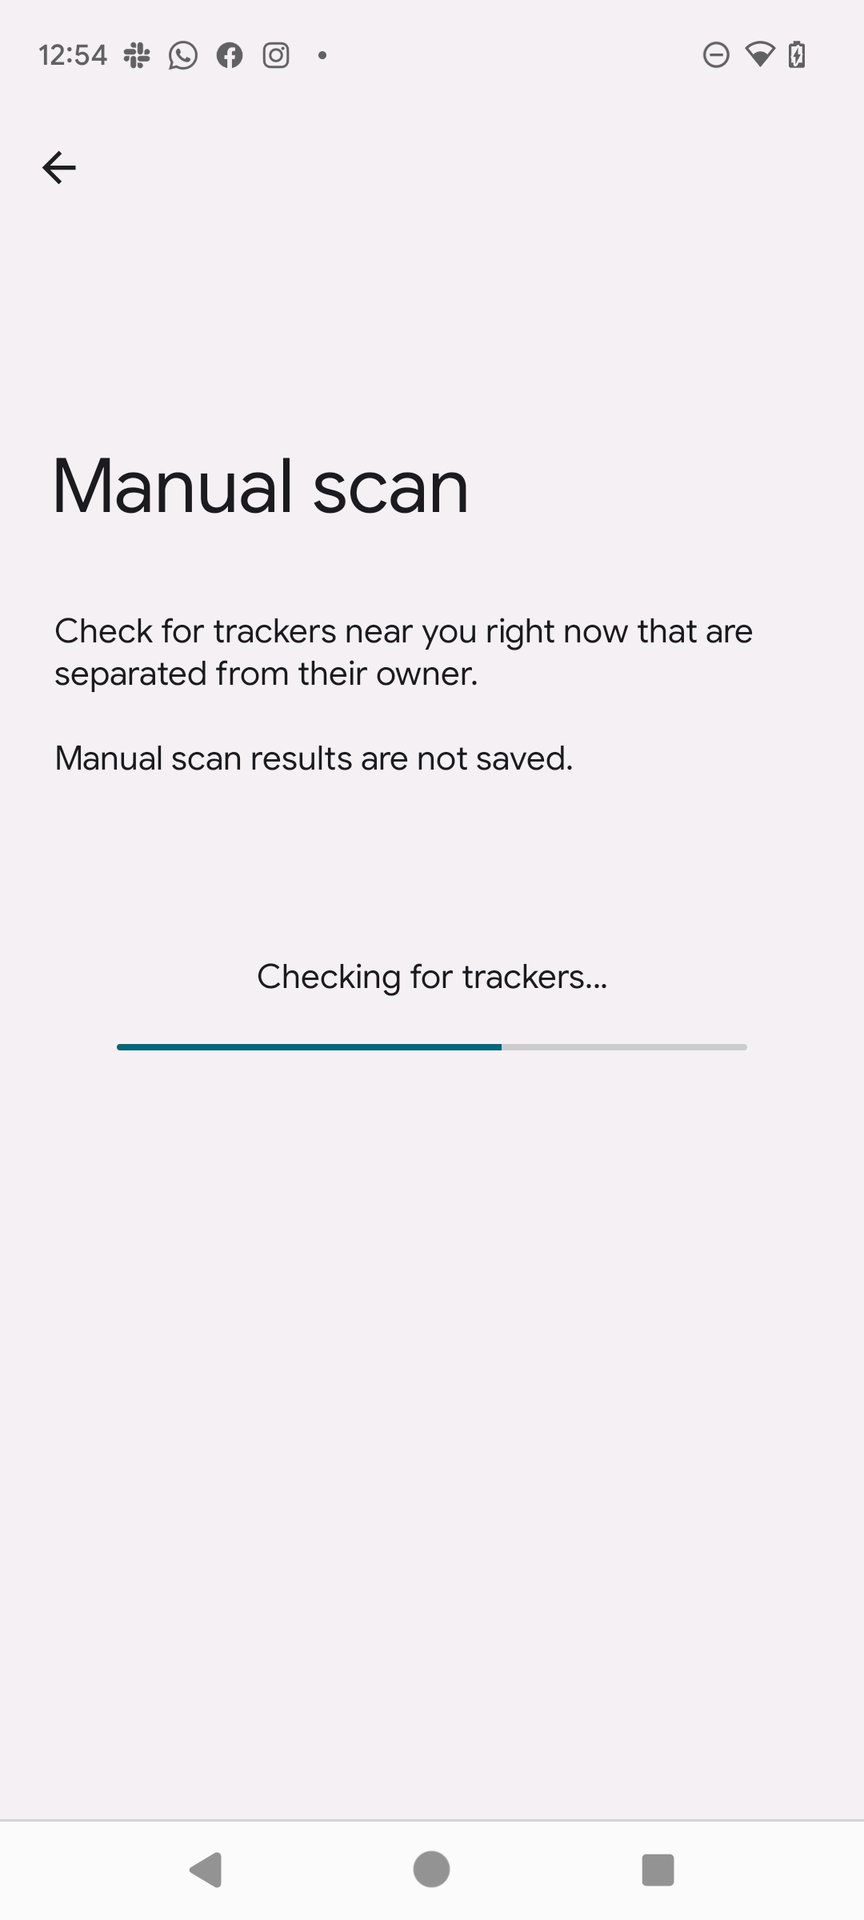 Find unknown trackers - Android Help